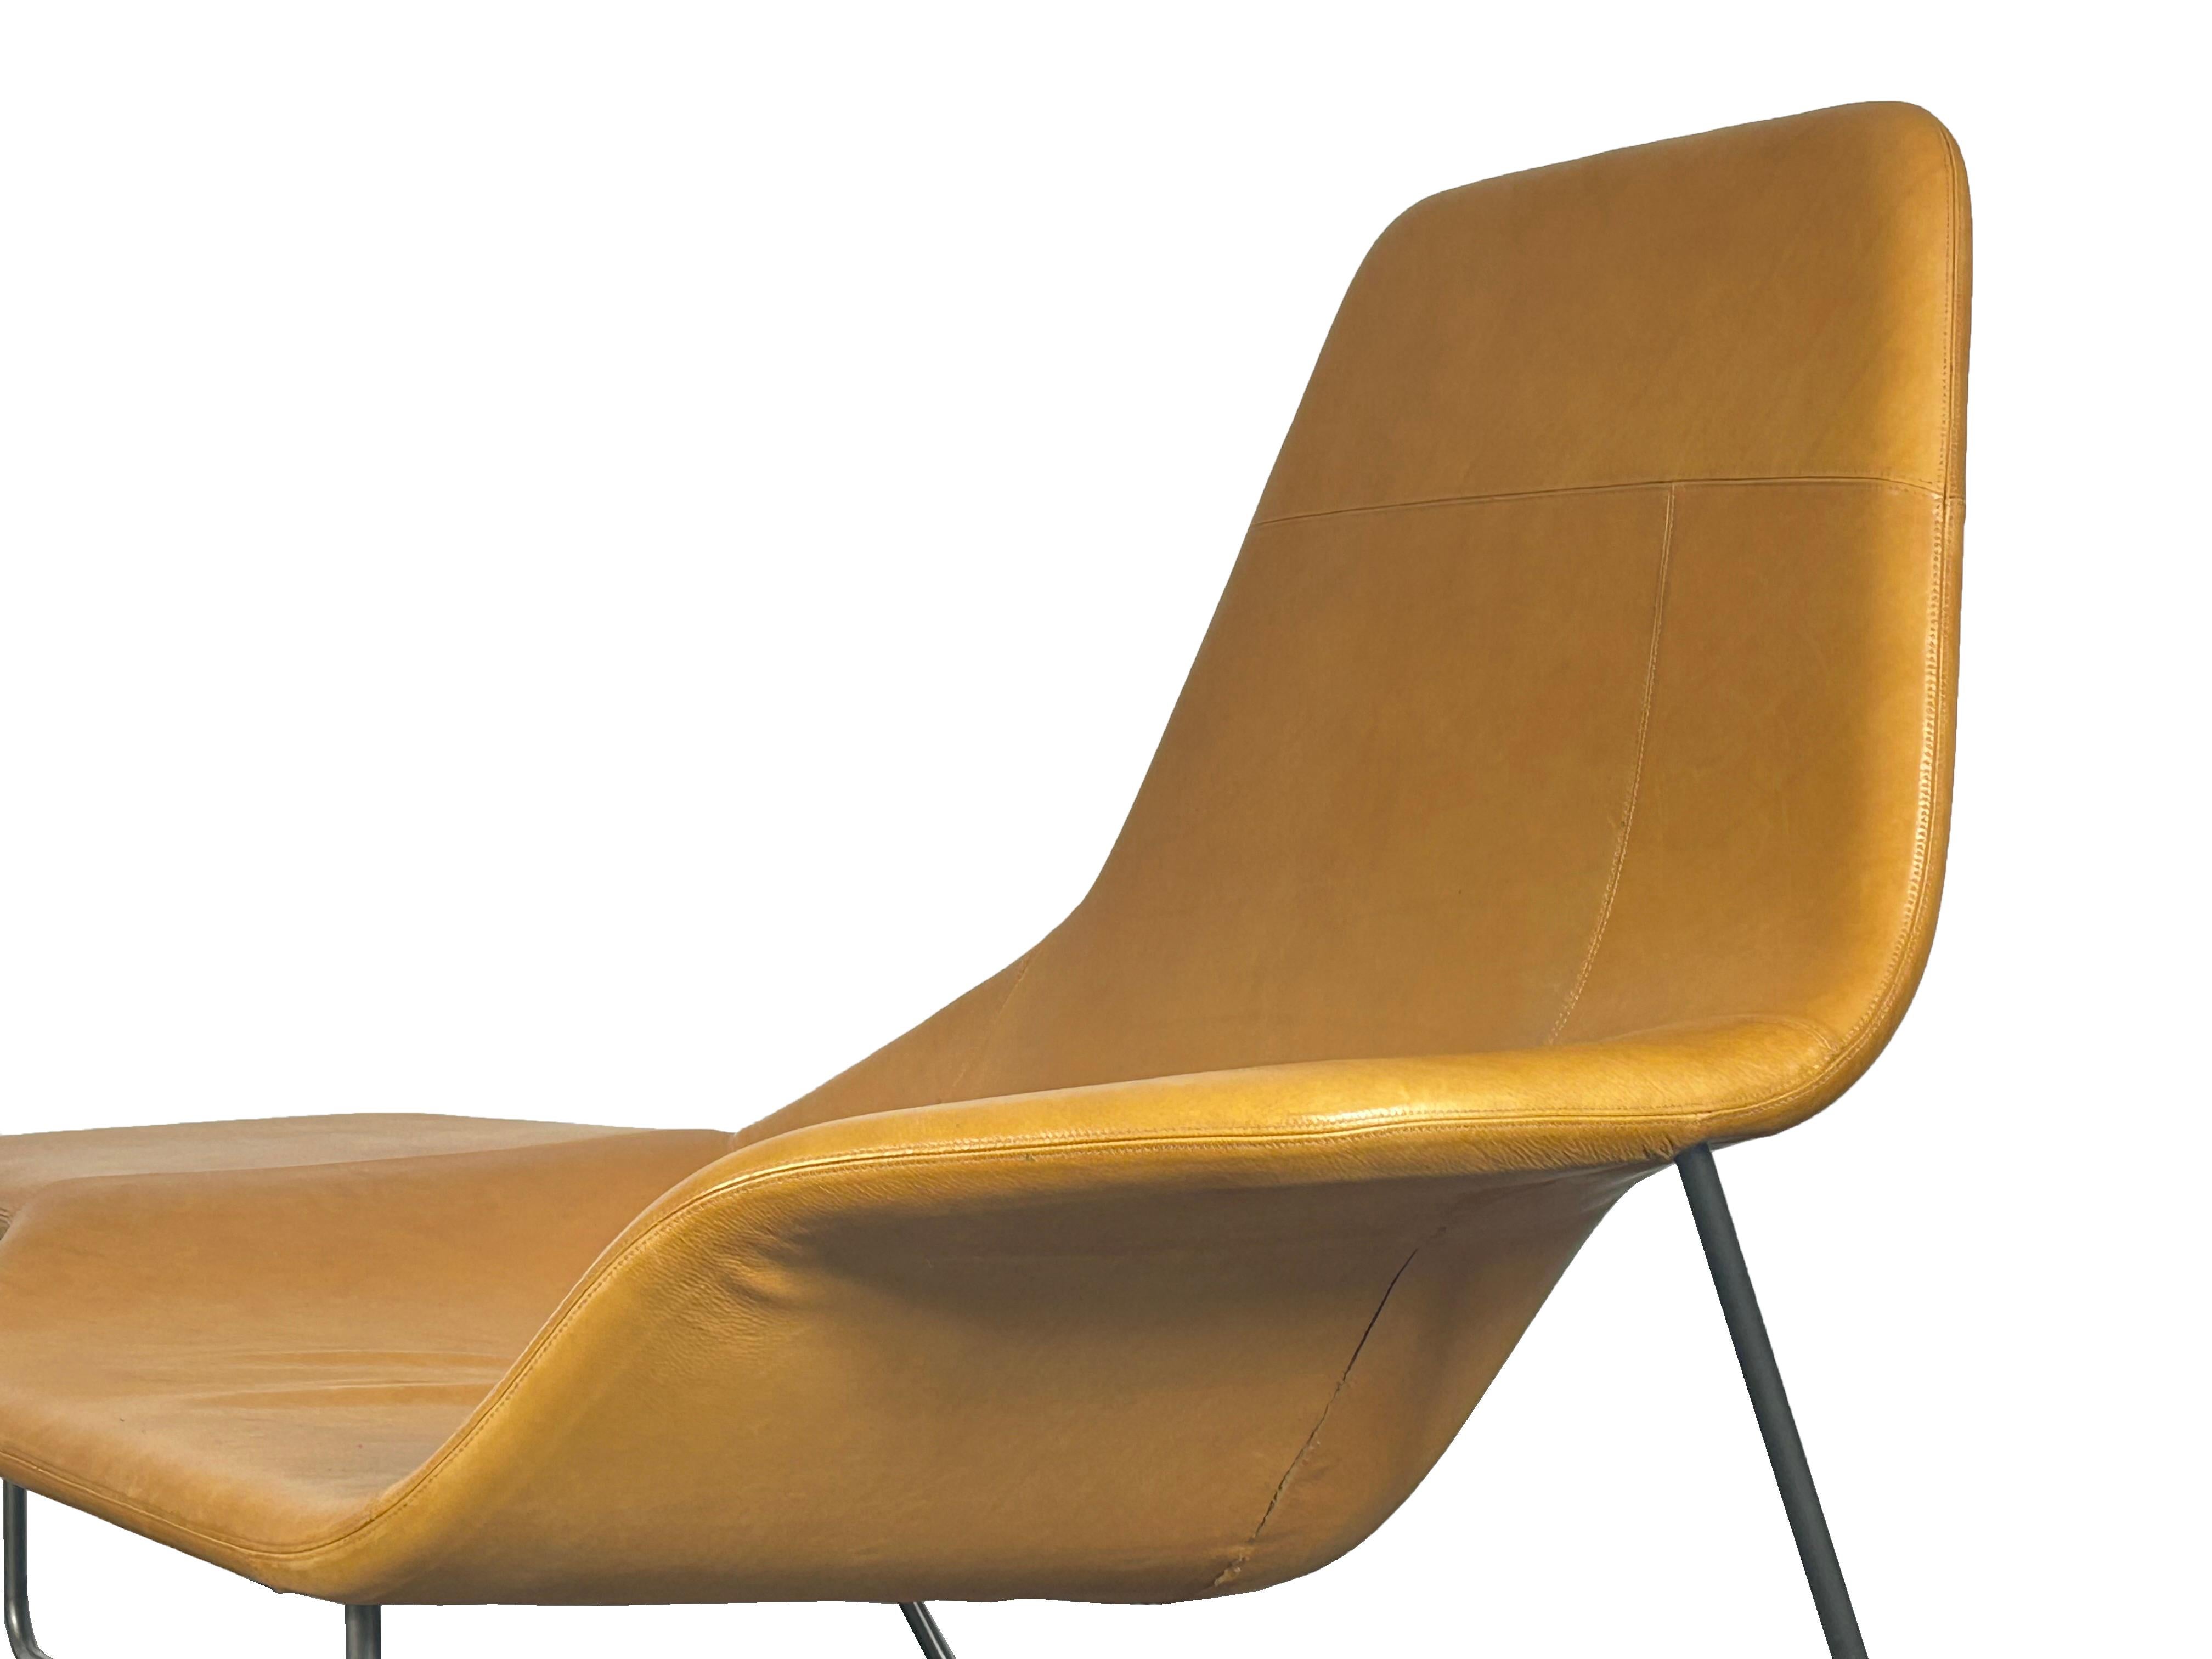 Zanotta Lama Chaiselongue Designed by Ludovica & Roberto Palomba, 2006 In Good Condition For Sale In Offenburg, Baden Wurthemberg